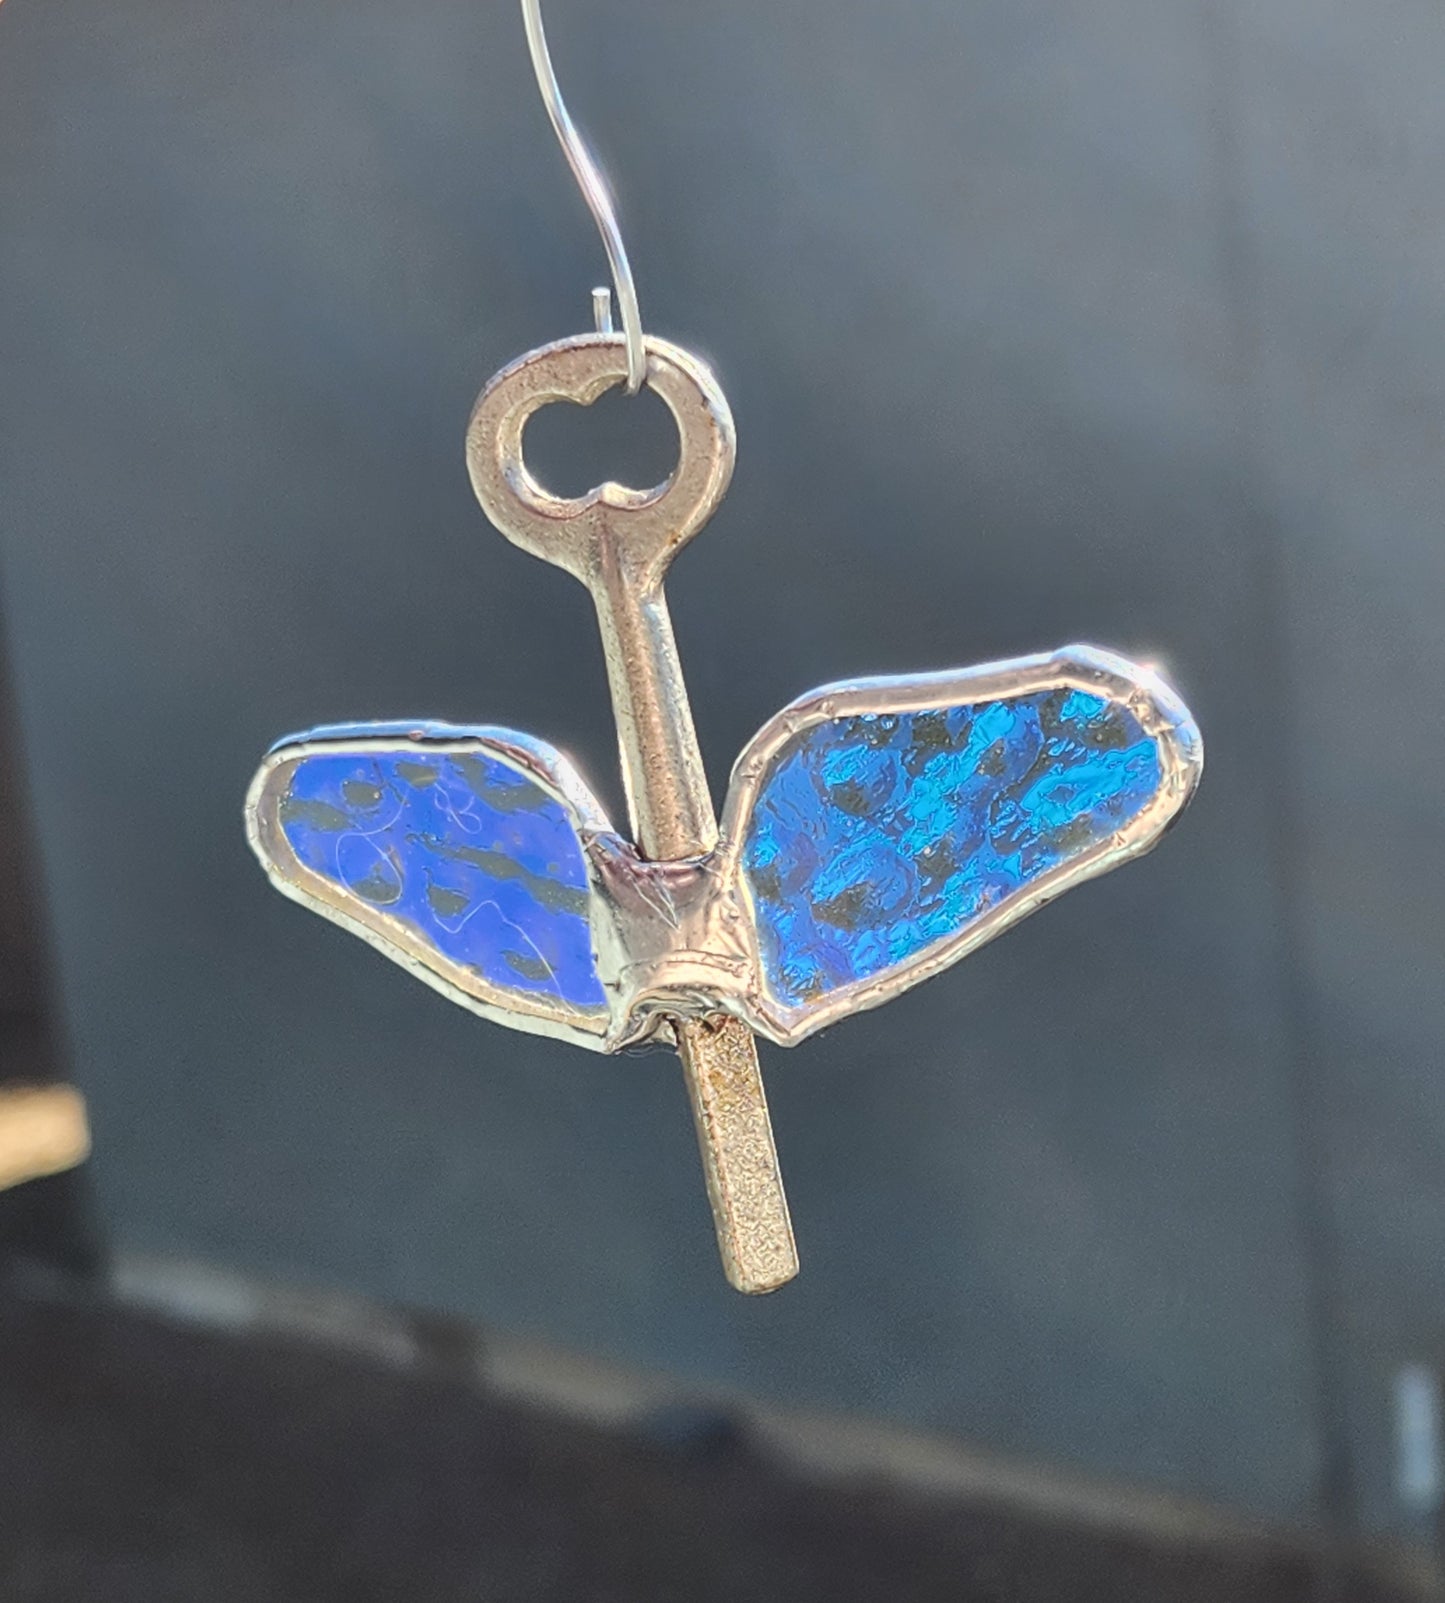 Flying Key Hammered Stained Glass